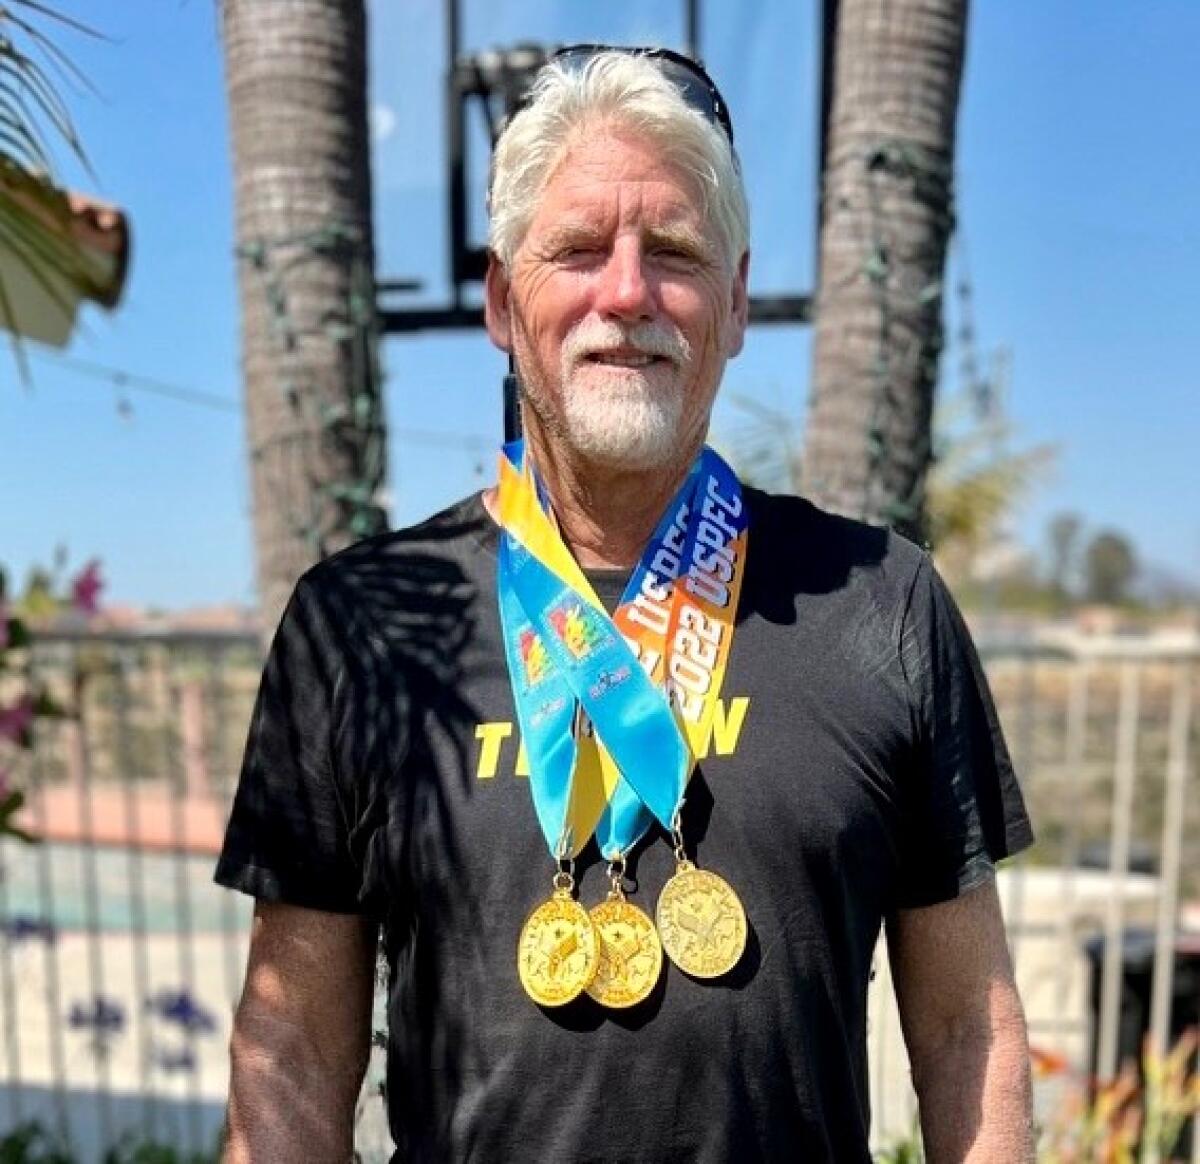 Chula Vistan Scott Young earned three track and field gold medals and broke a record in the 2022 World Police & Fire Games.